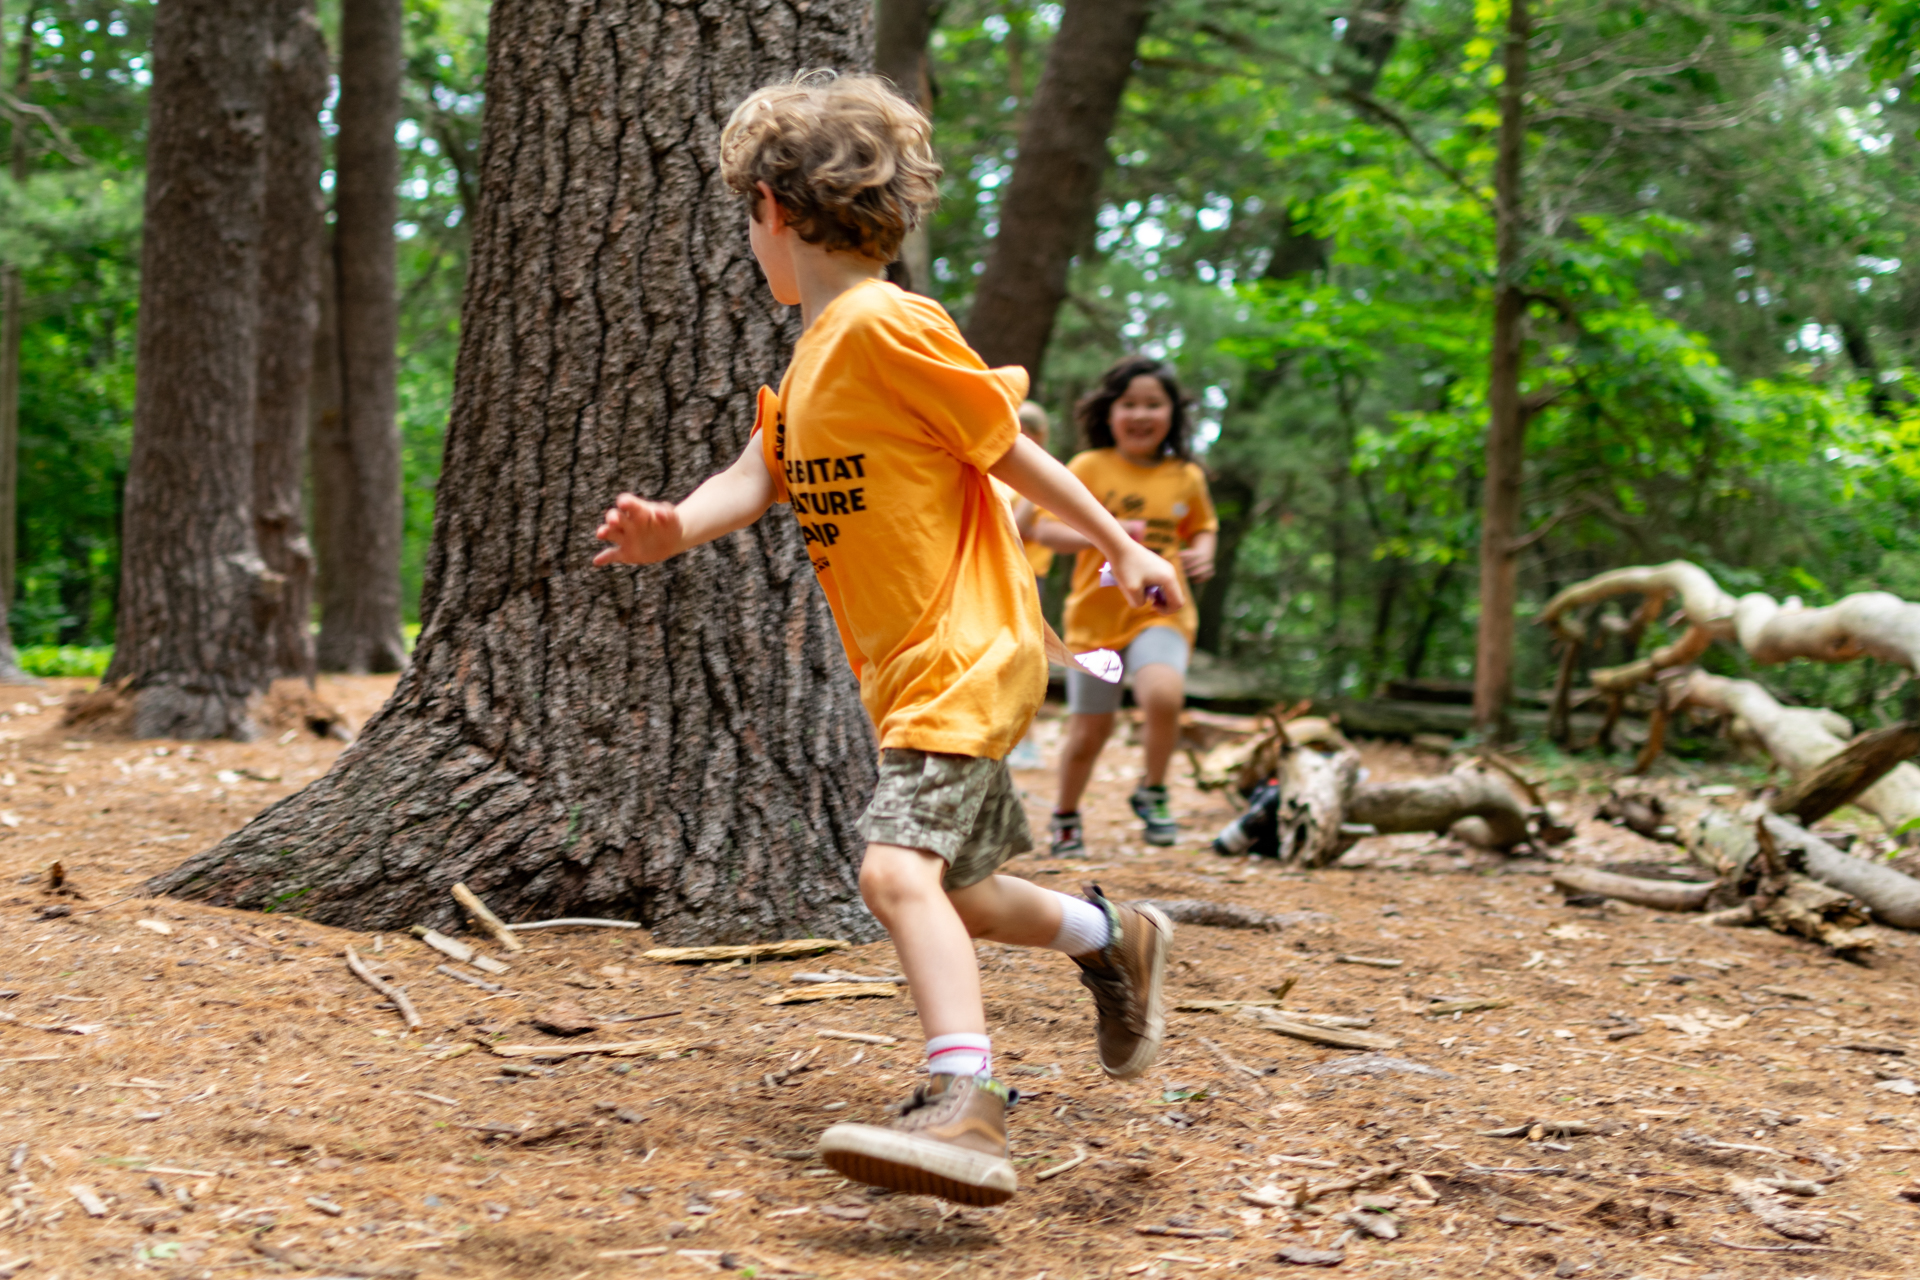 Two campers at Habitat Nature Camp running through a clearing in the woods, playing tag